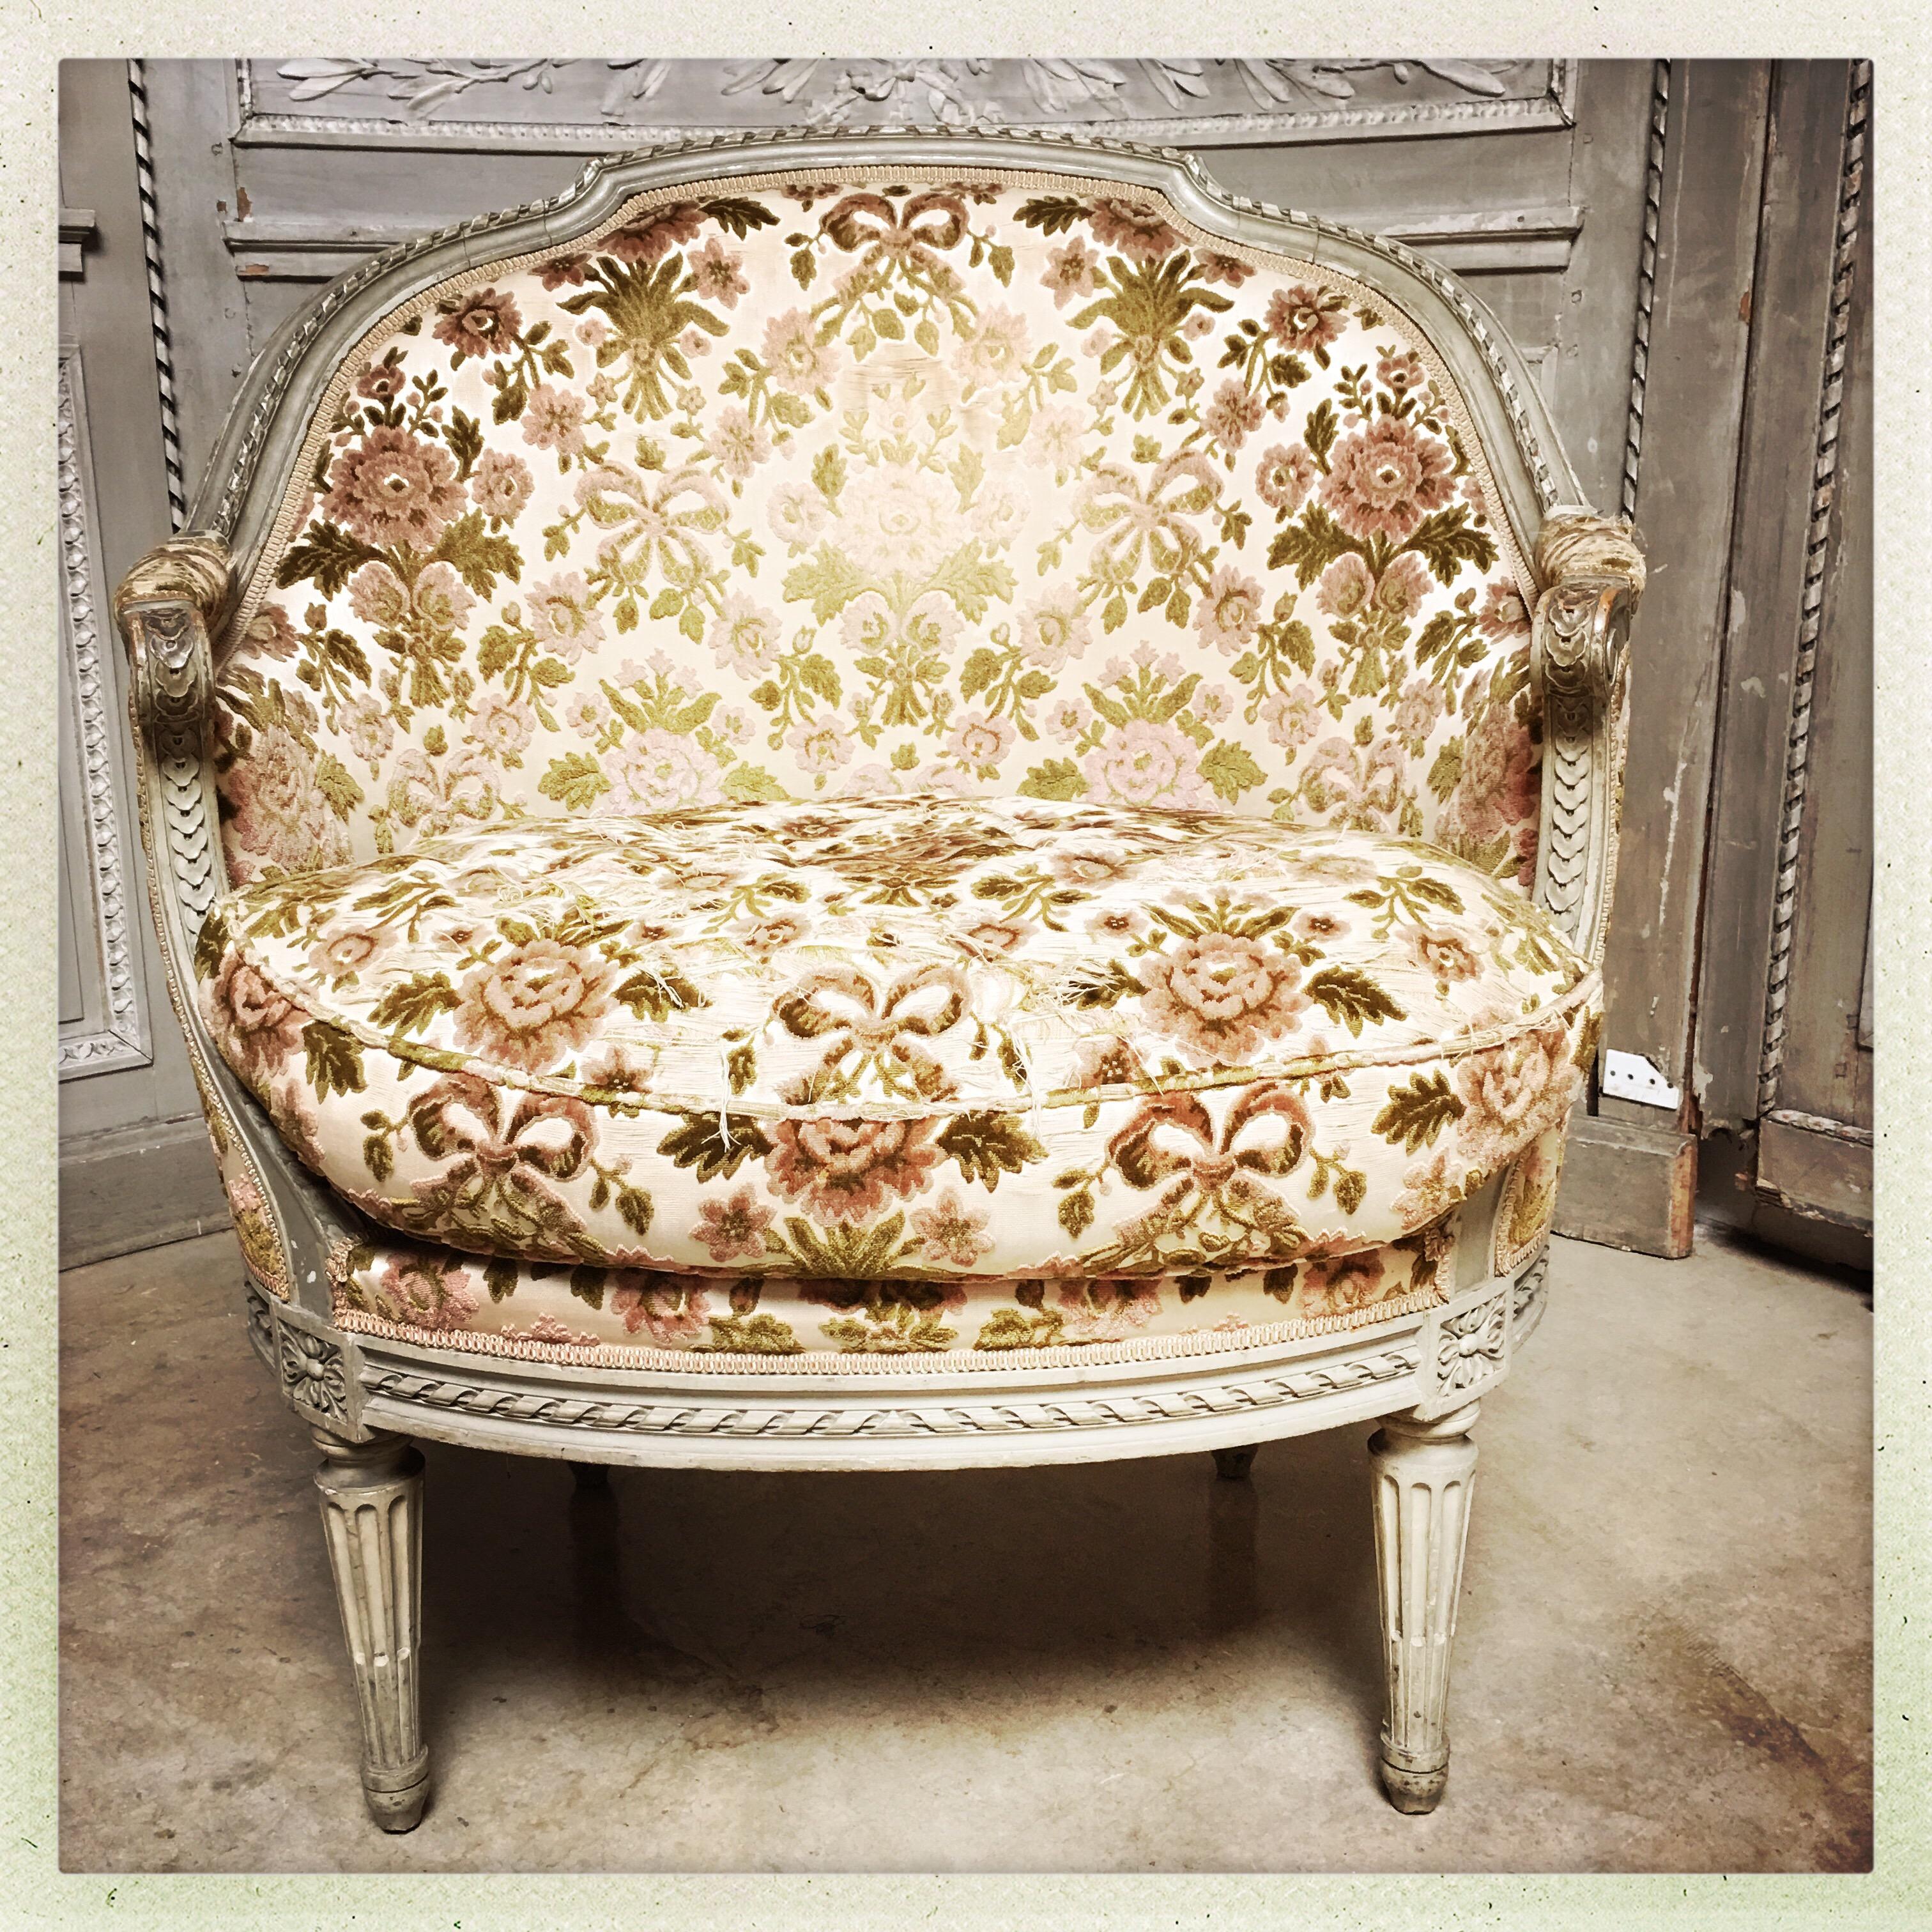 A French Louis XVI style marquise (extra wide chair to accommodate ladies dresses) in a French gray painted finish.